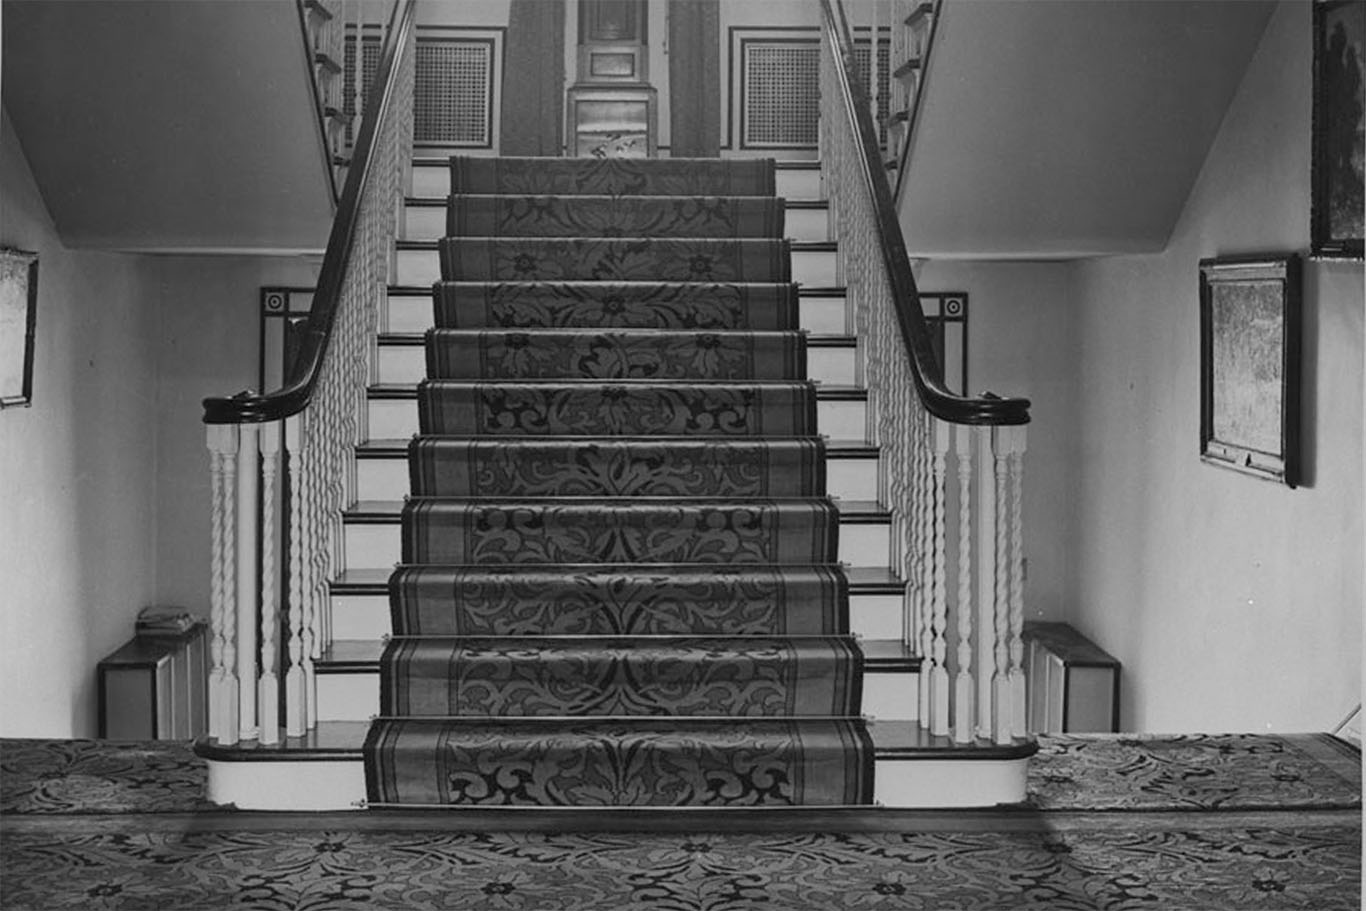 View of the Private Entrance Stairs from the Ground Floor, 1943